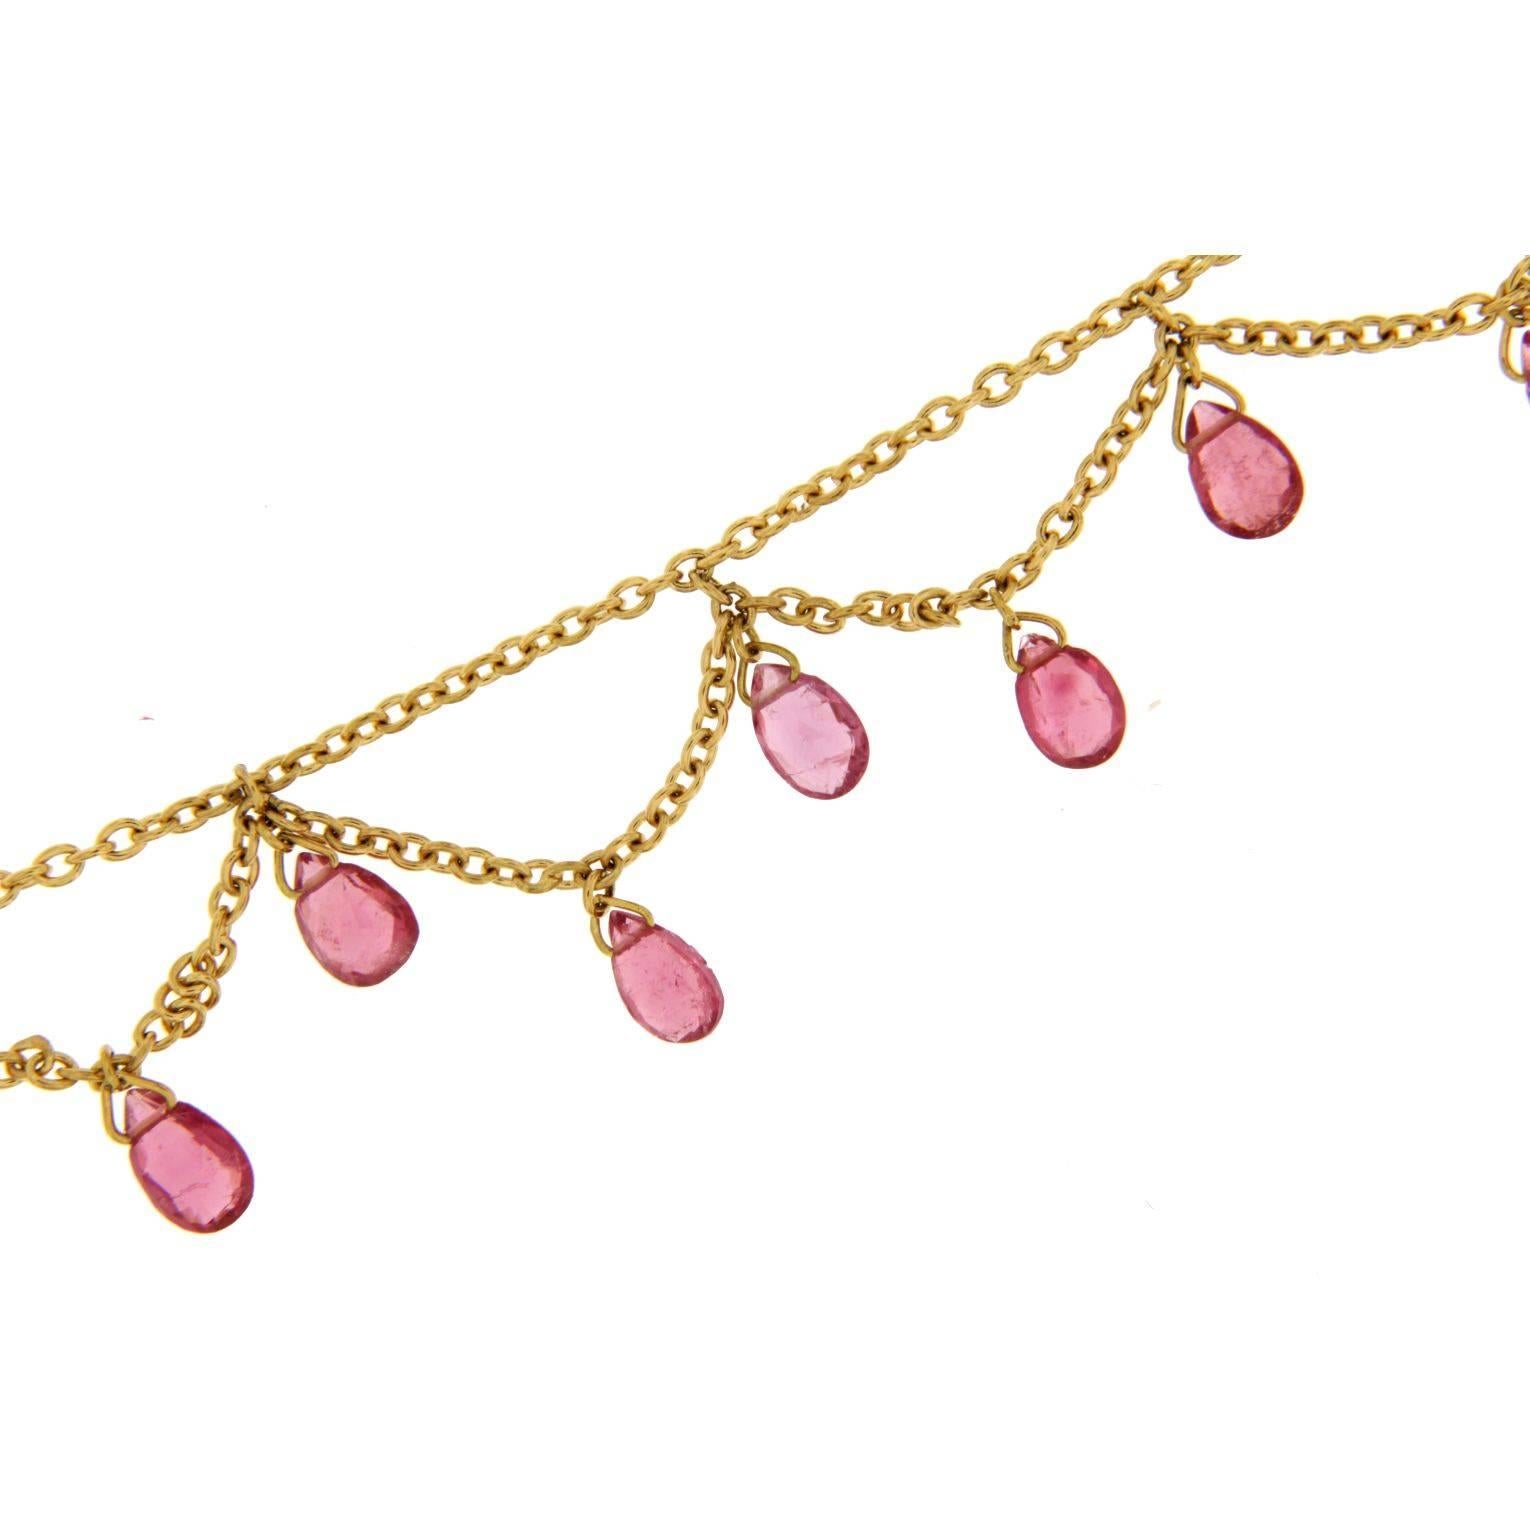 Jona design collection, hand crafted in Italy, 18 karat yellow gold chain necklace, featuring 7.65 carats of briolette cut pink tourmaline drops. 
Total length: 18.11in.- 46cm. 

All Jona jewelry is new and has never been previously owned or worn.